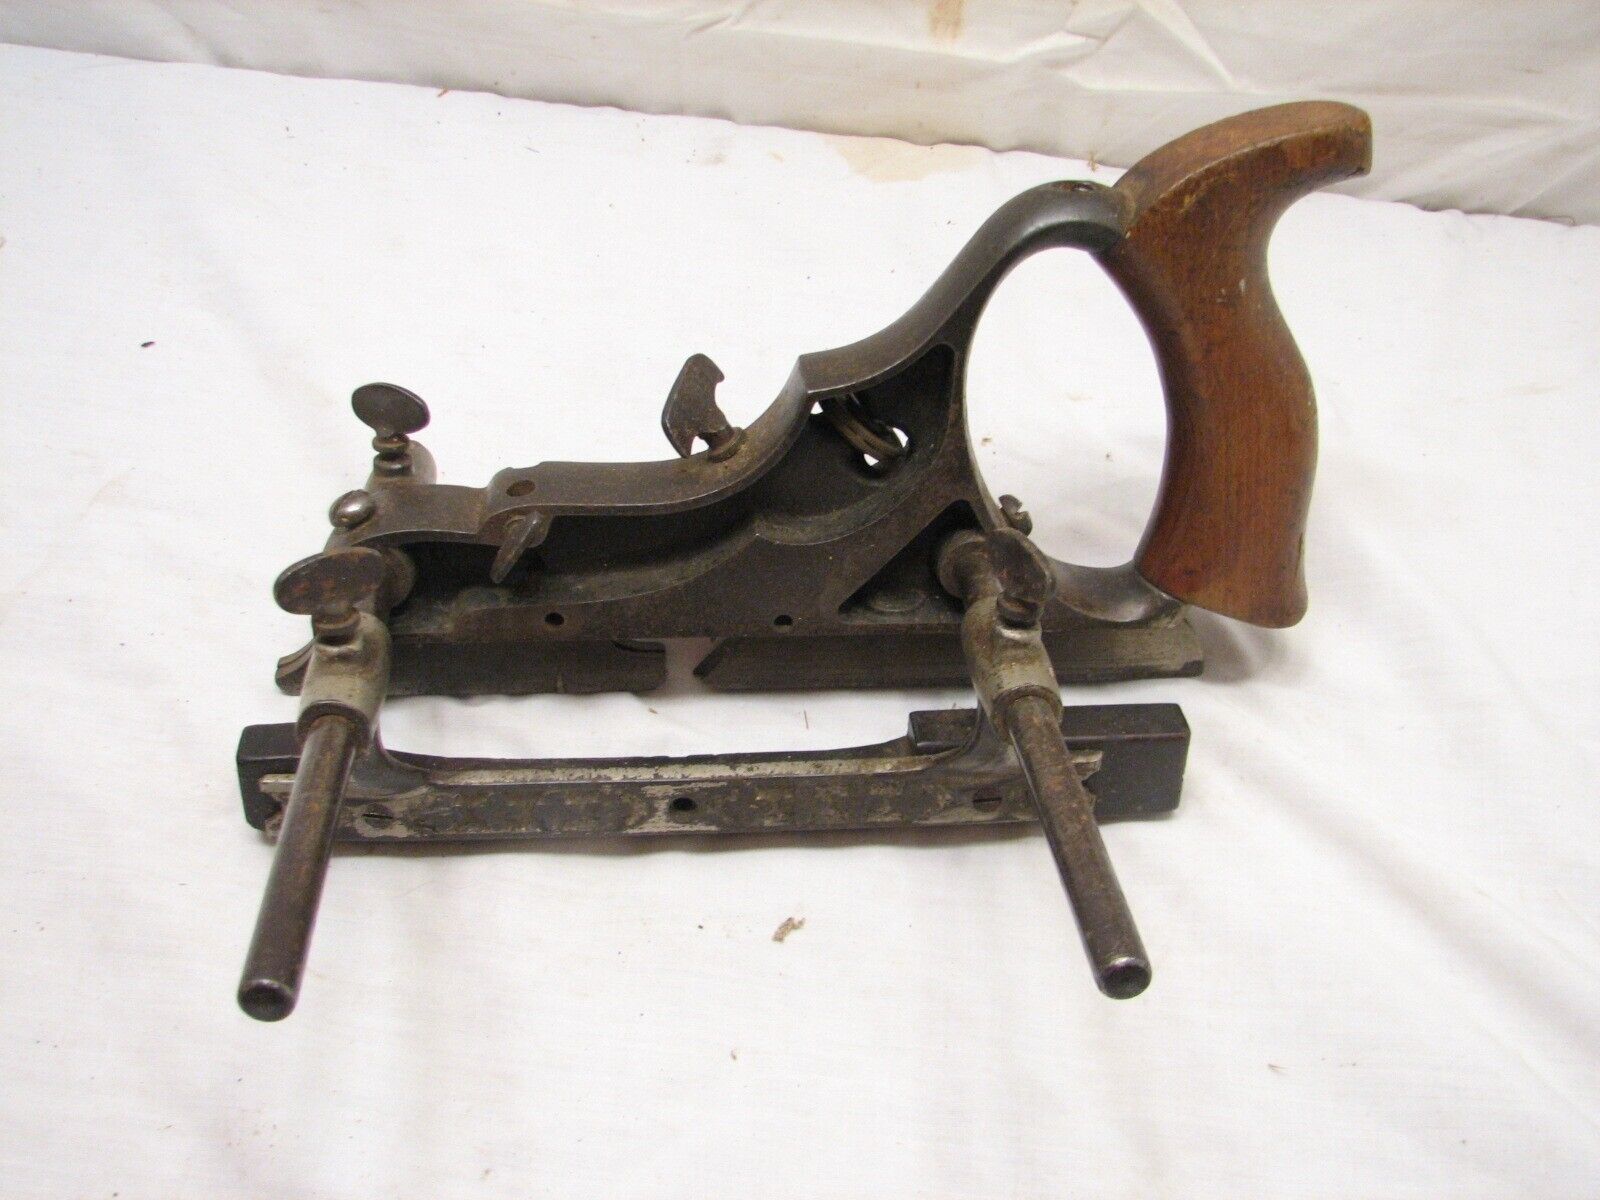 Early Siegley 1890 Patent Combination Plow Plane Wood Tool Carpenter Woodworking